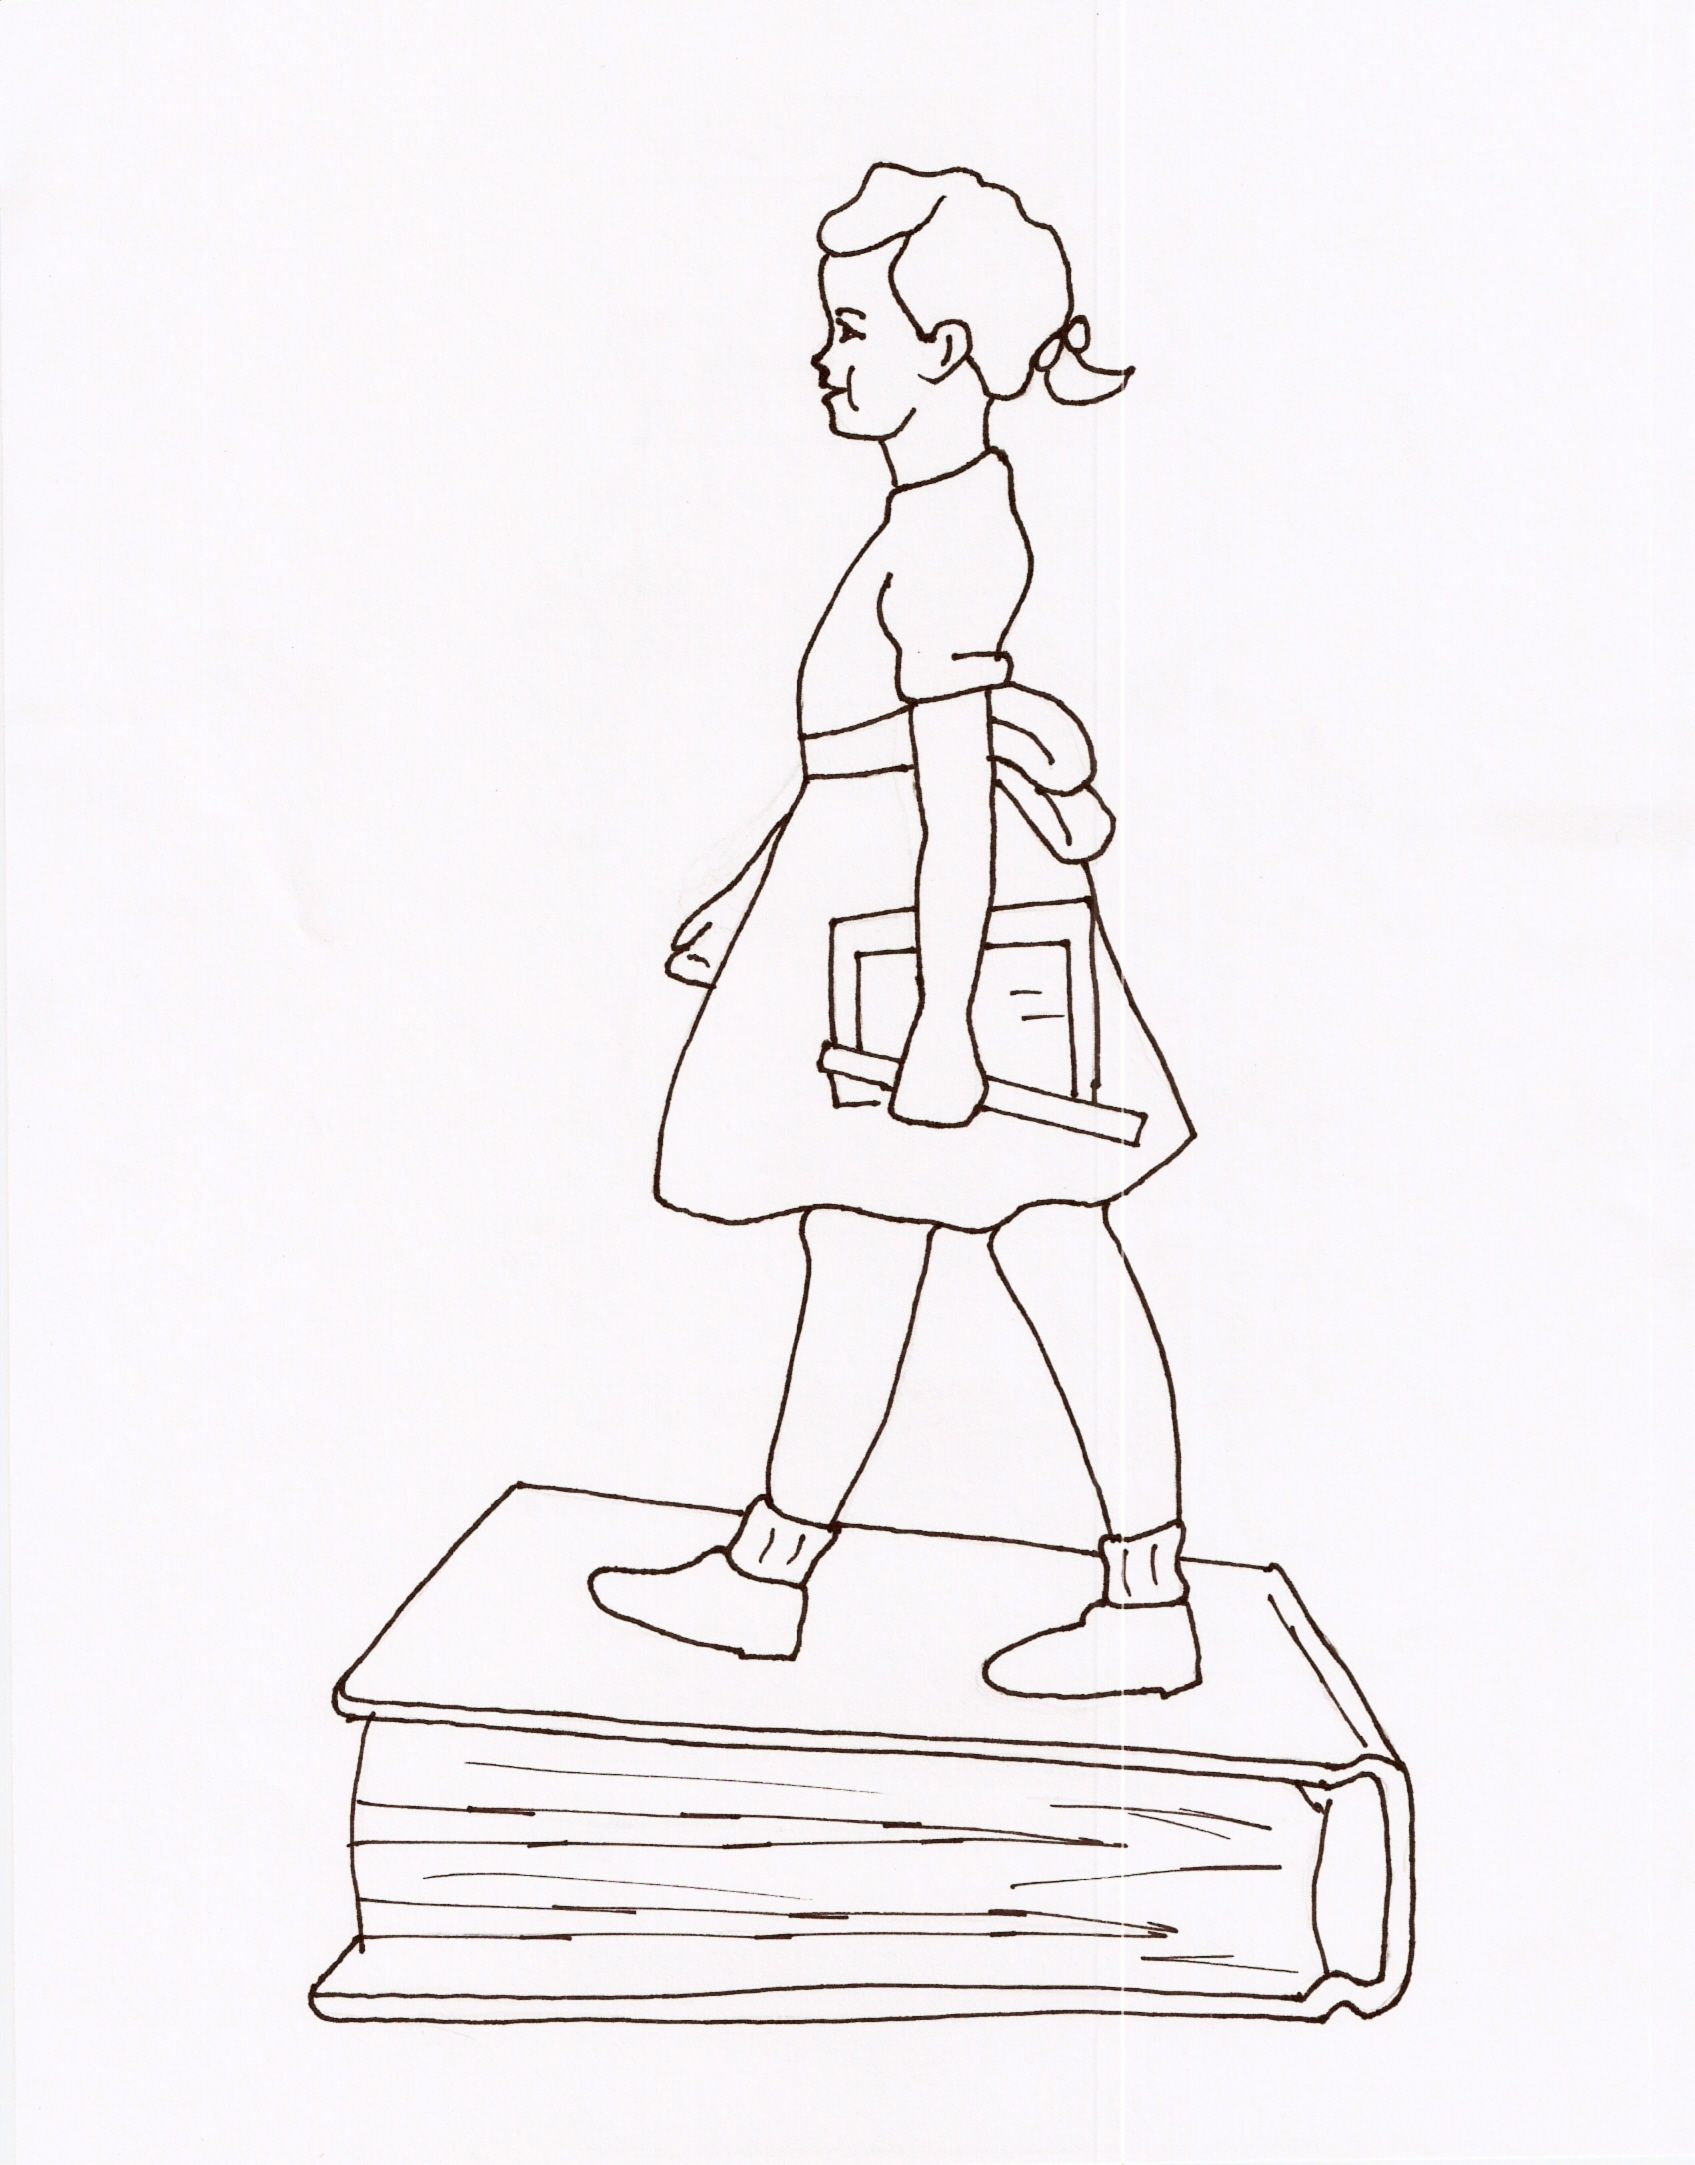 Ruby bridges goes to school by ruby bridges coloring page black history month activities black history month crafts black history month projects